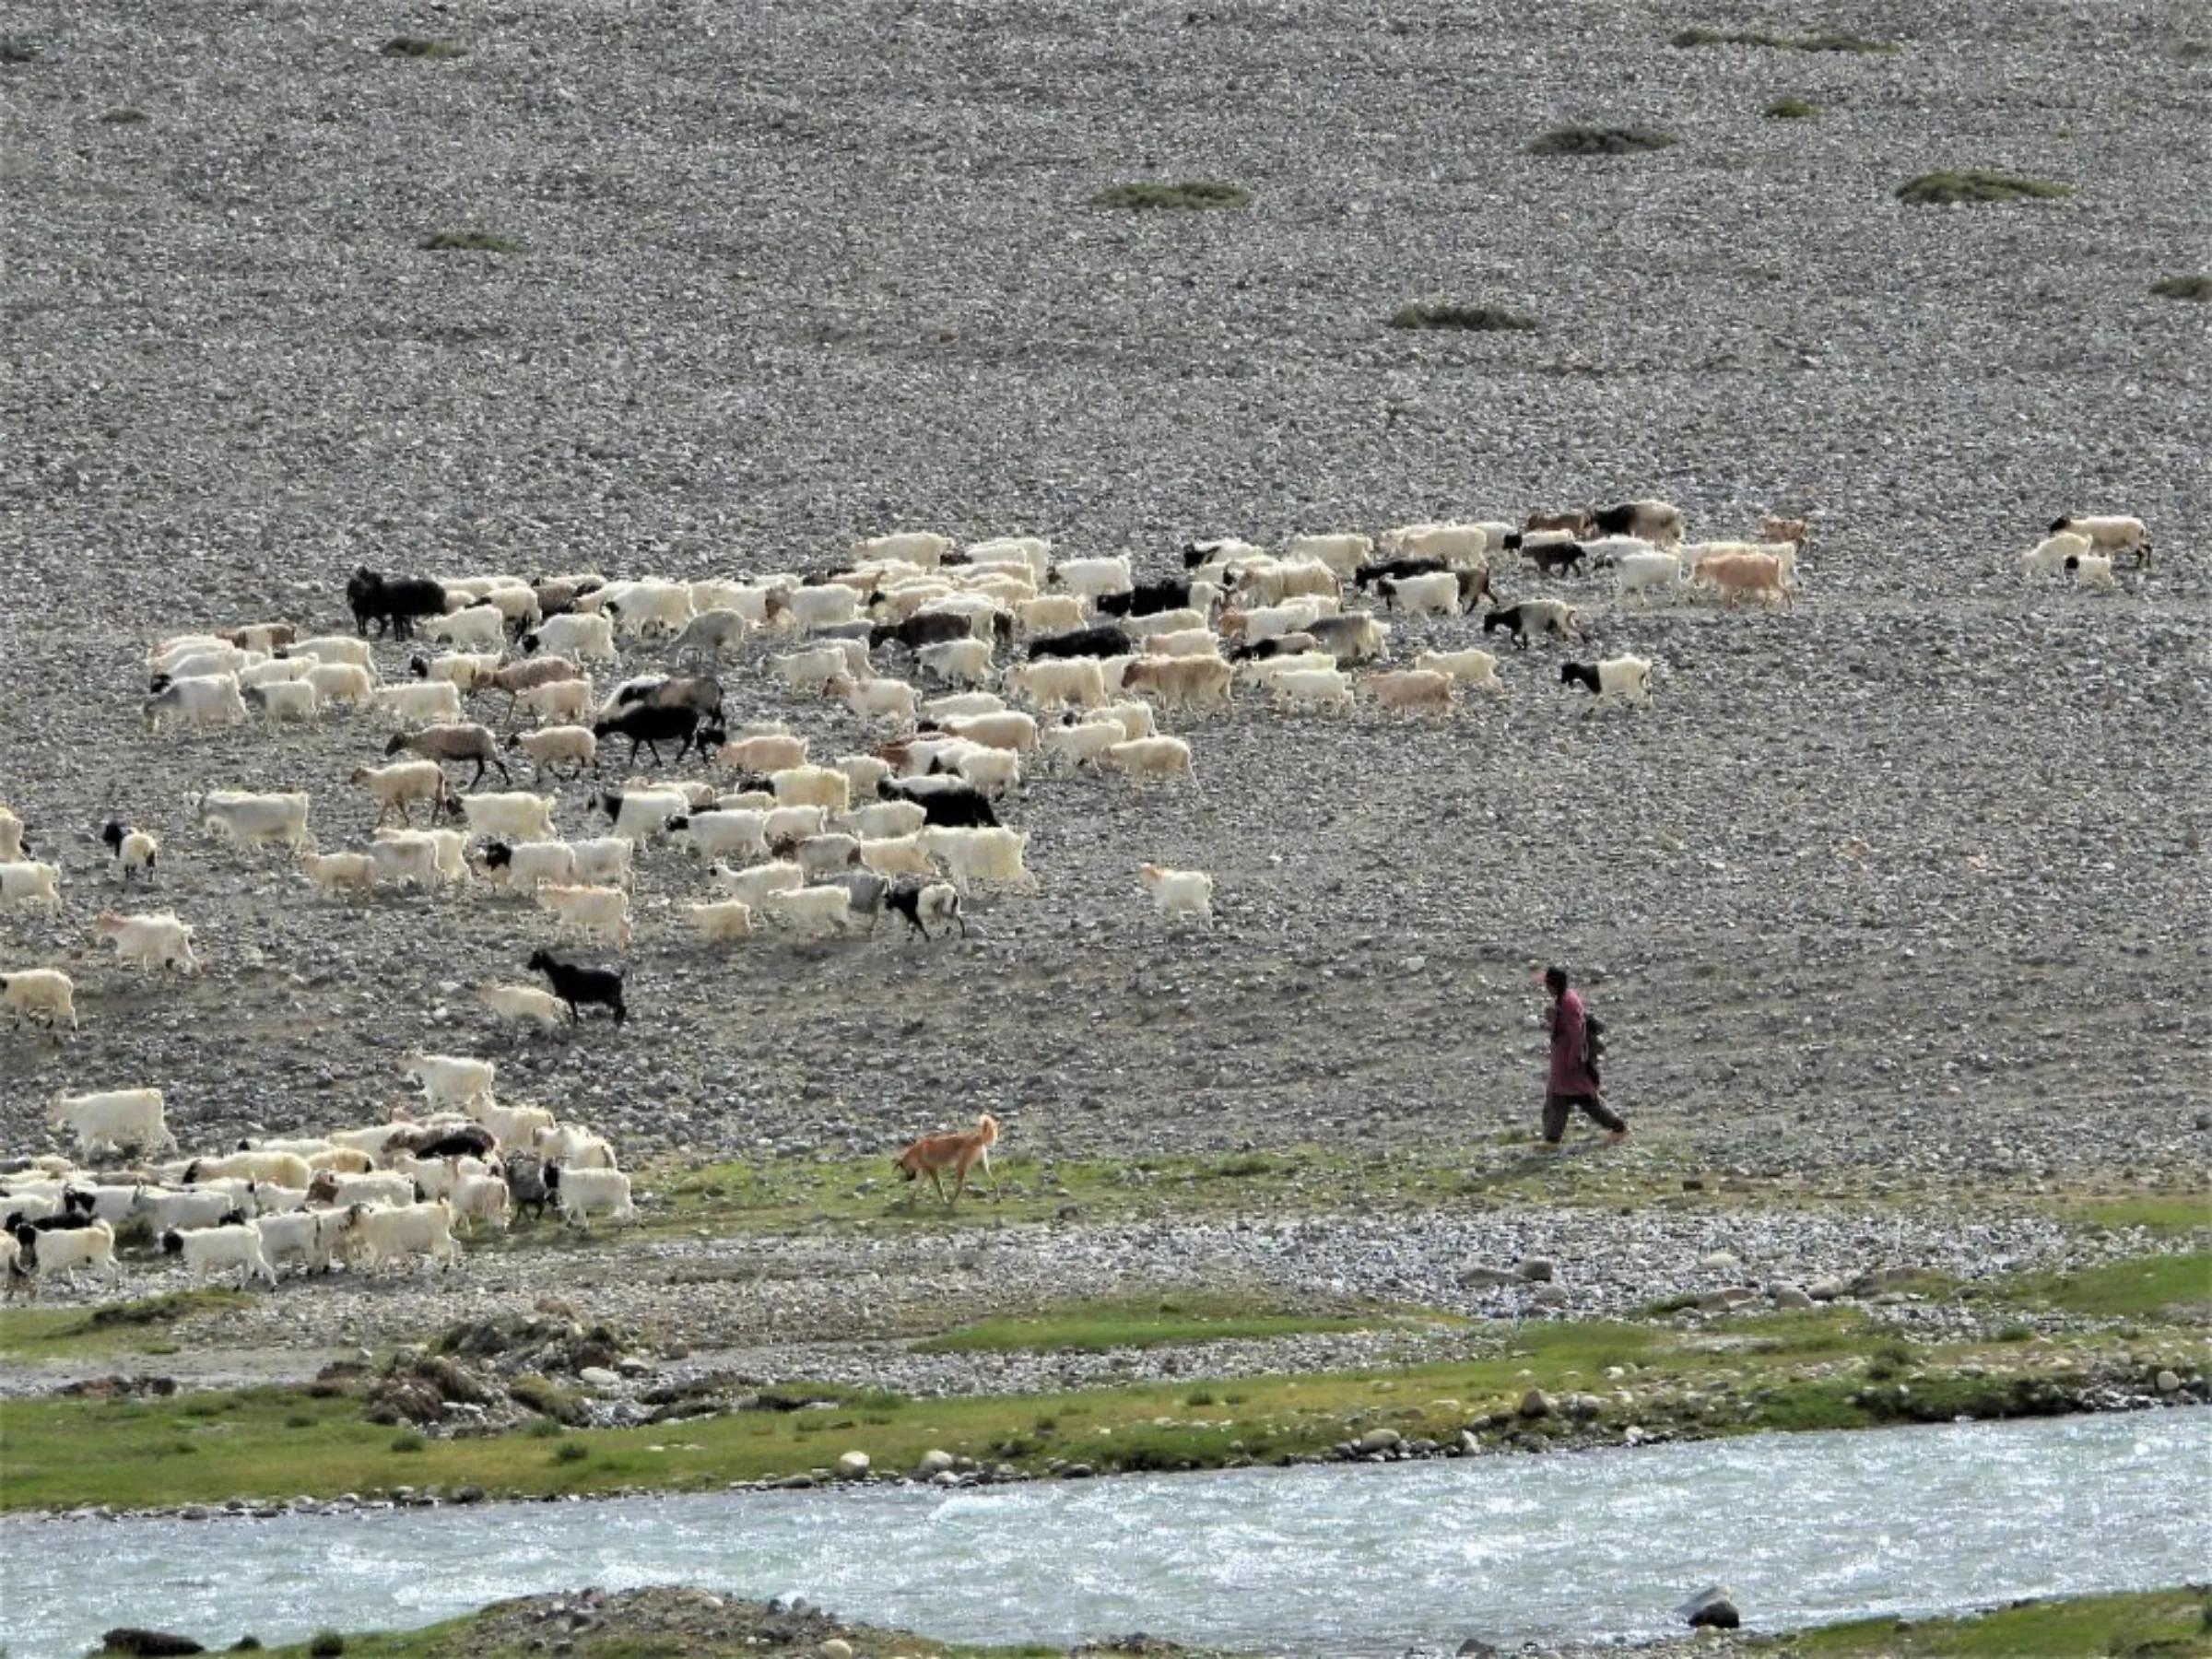 A herder grazing his goats near a tributory of Indus River in Ladakh, India, July 7, 2022